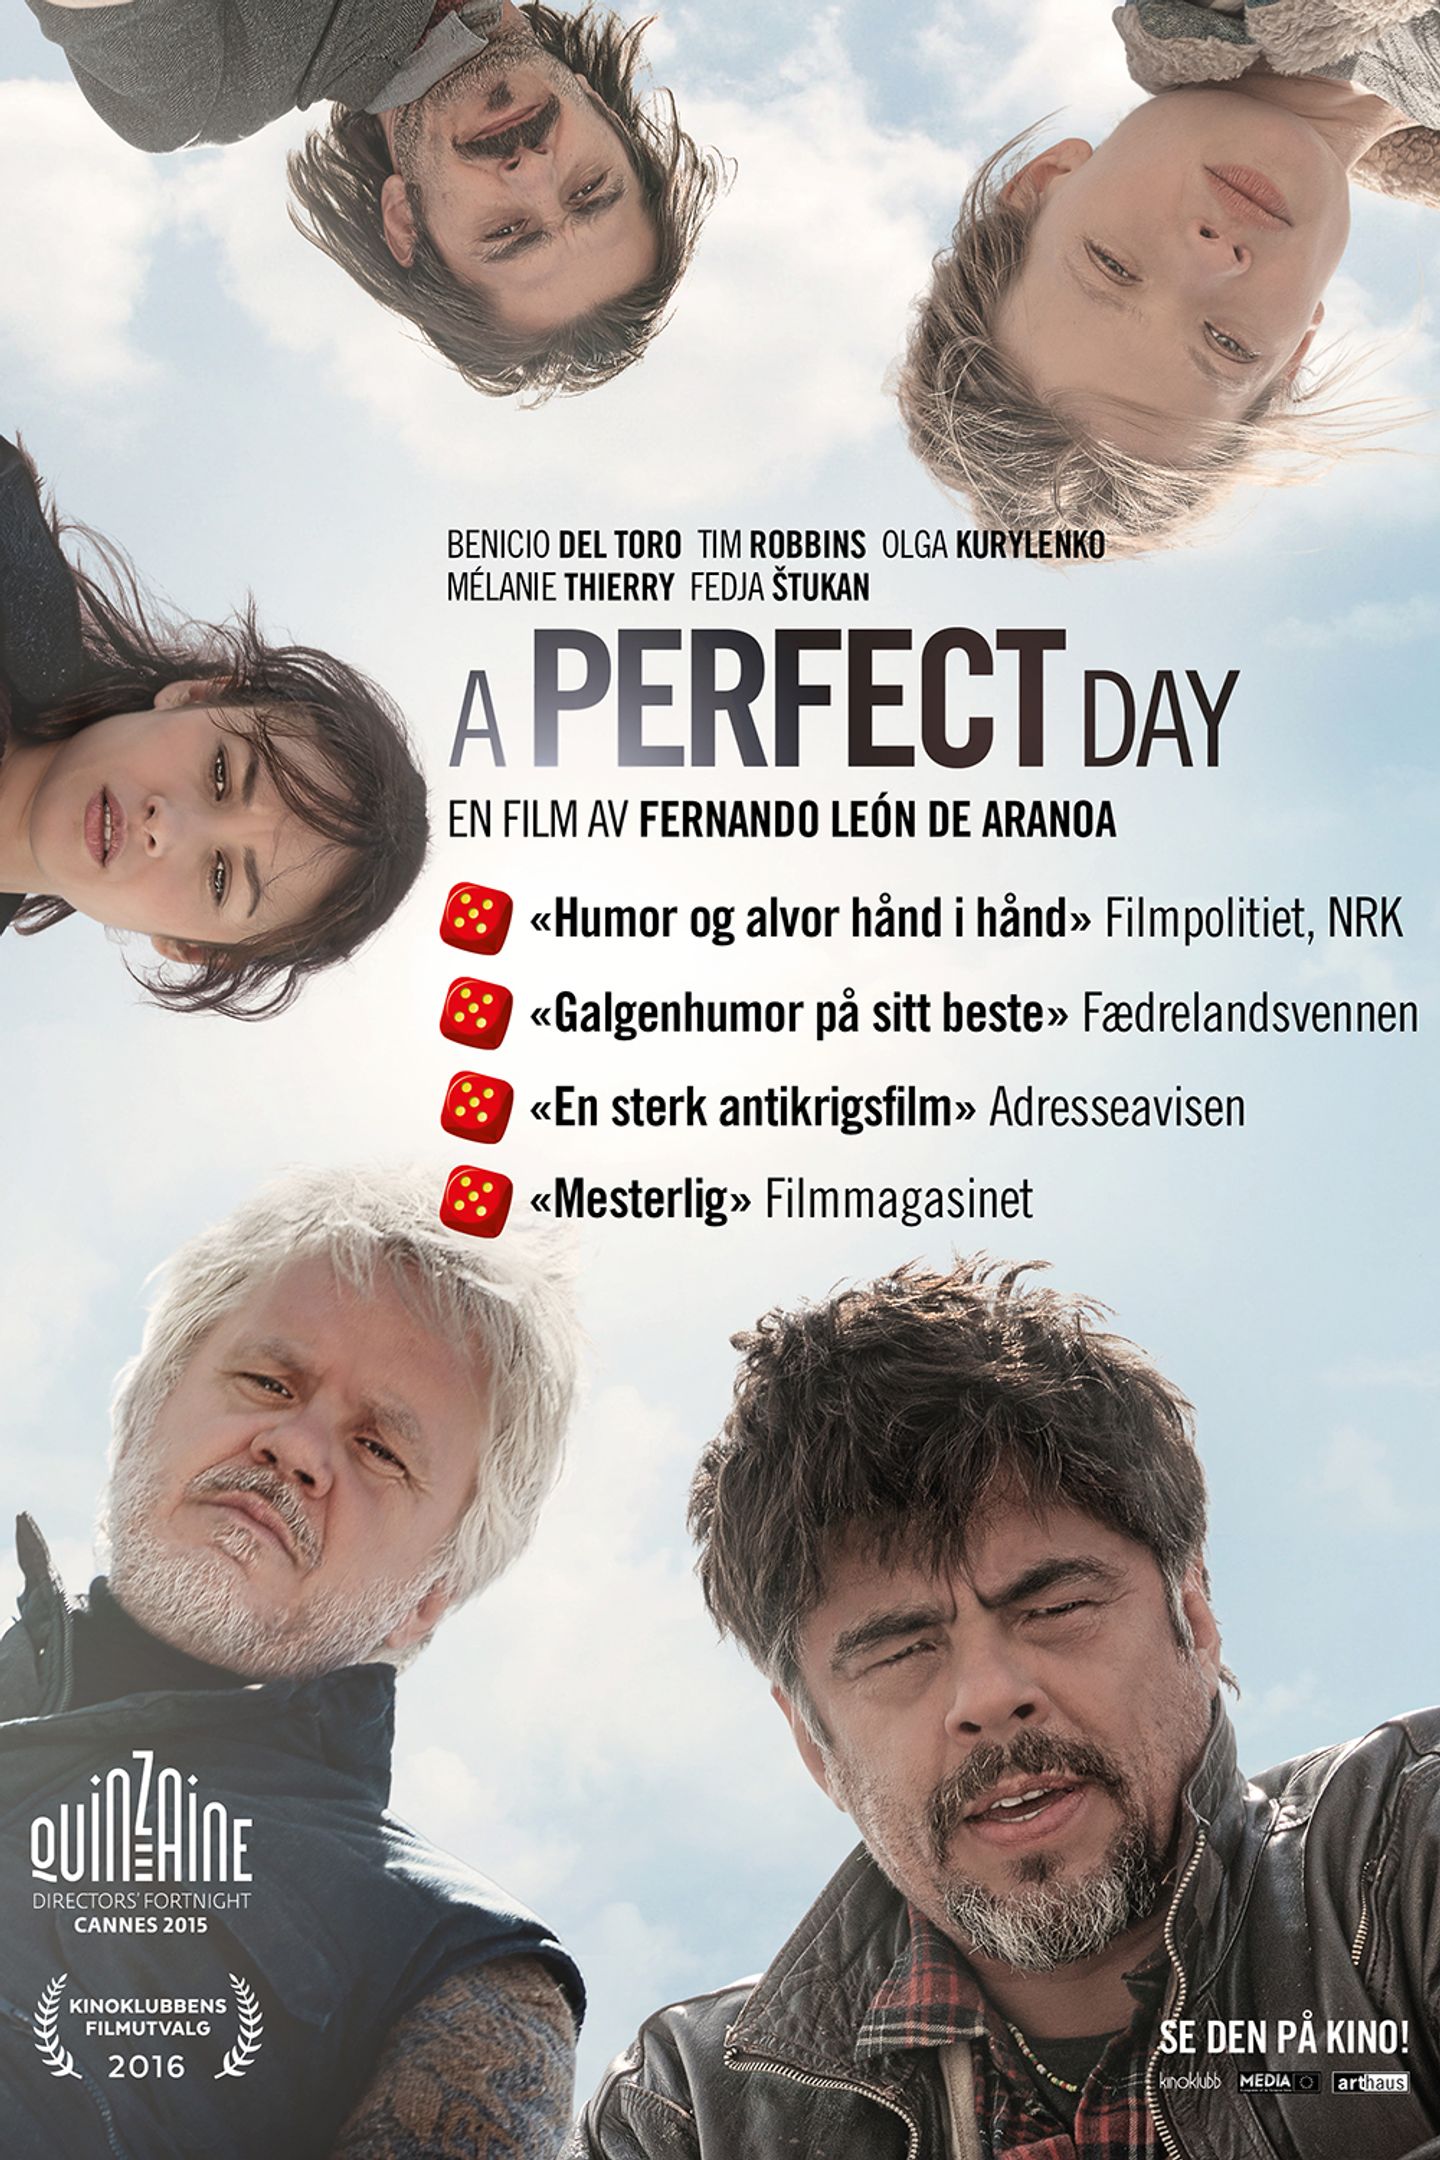 Plakat for 'A Perfect Day'